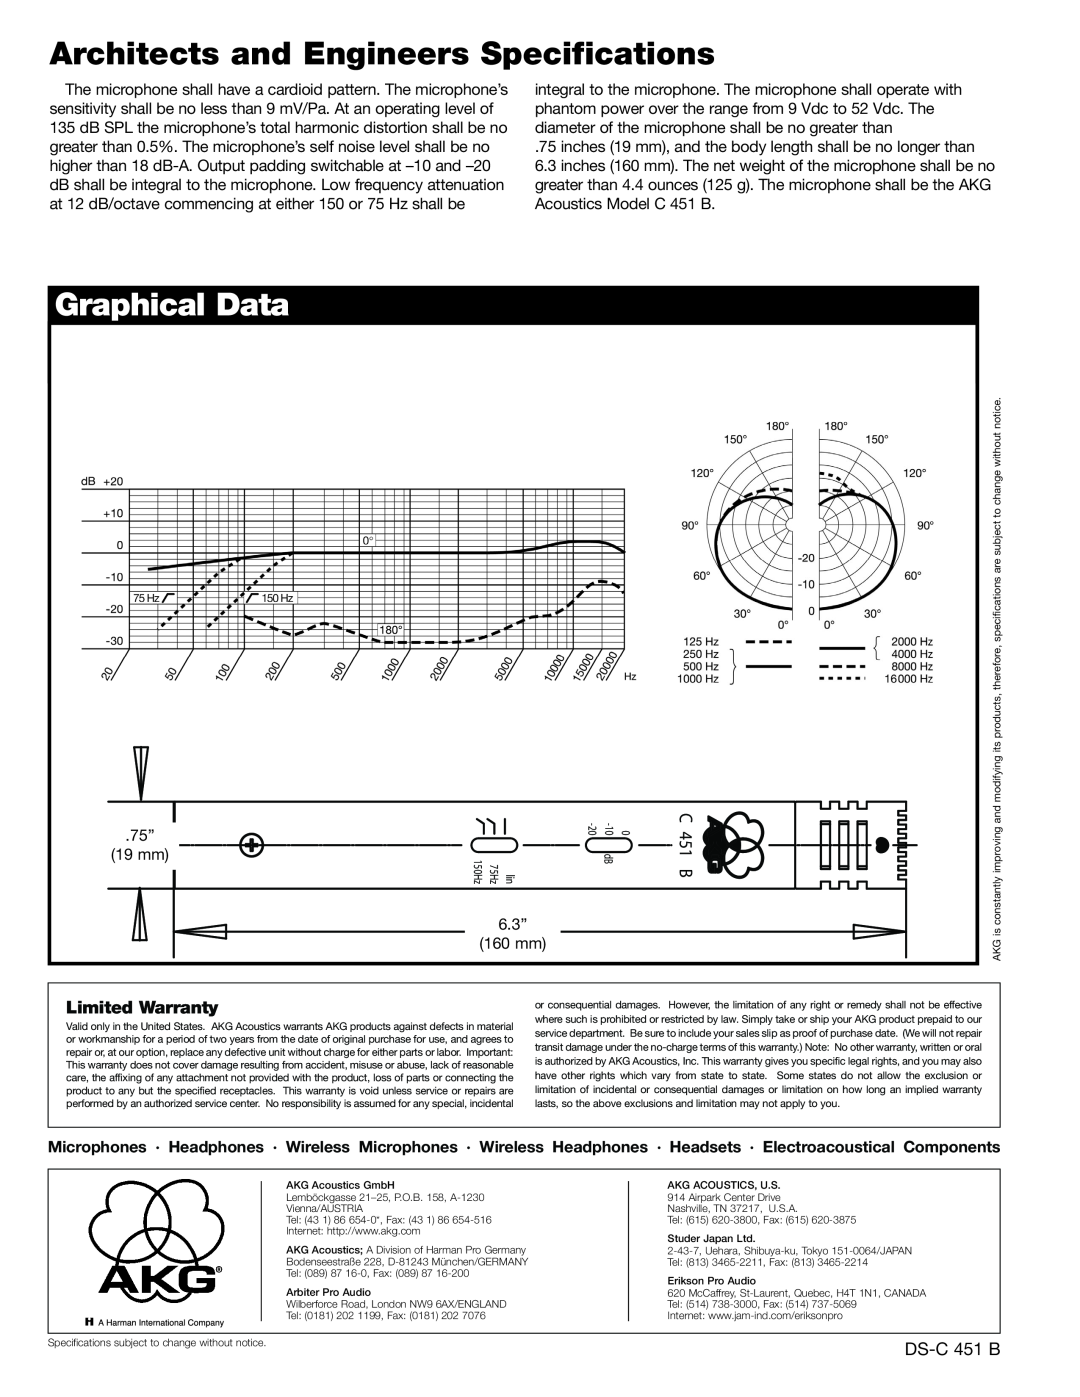 AKG Acoustics C 451B Architects and Engineers Specifications, Graphical Data, Limited Warranty, DS-C 451 B 